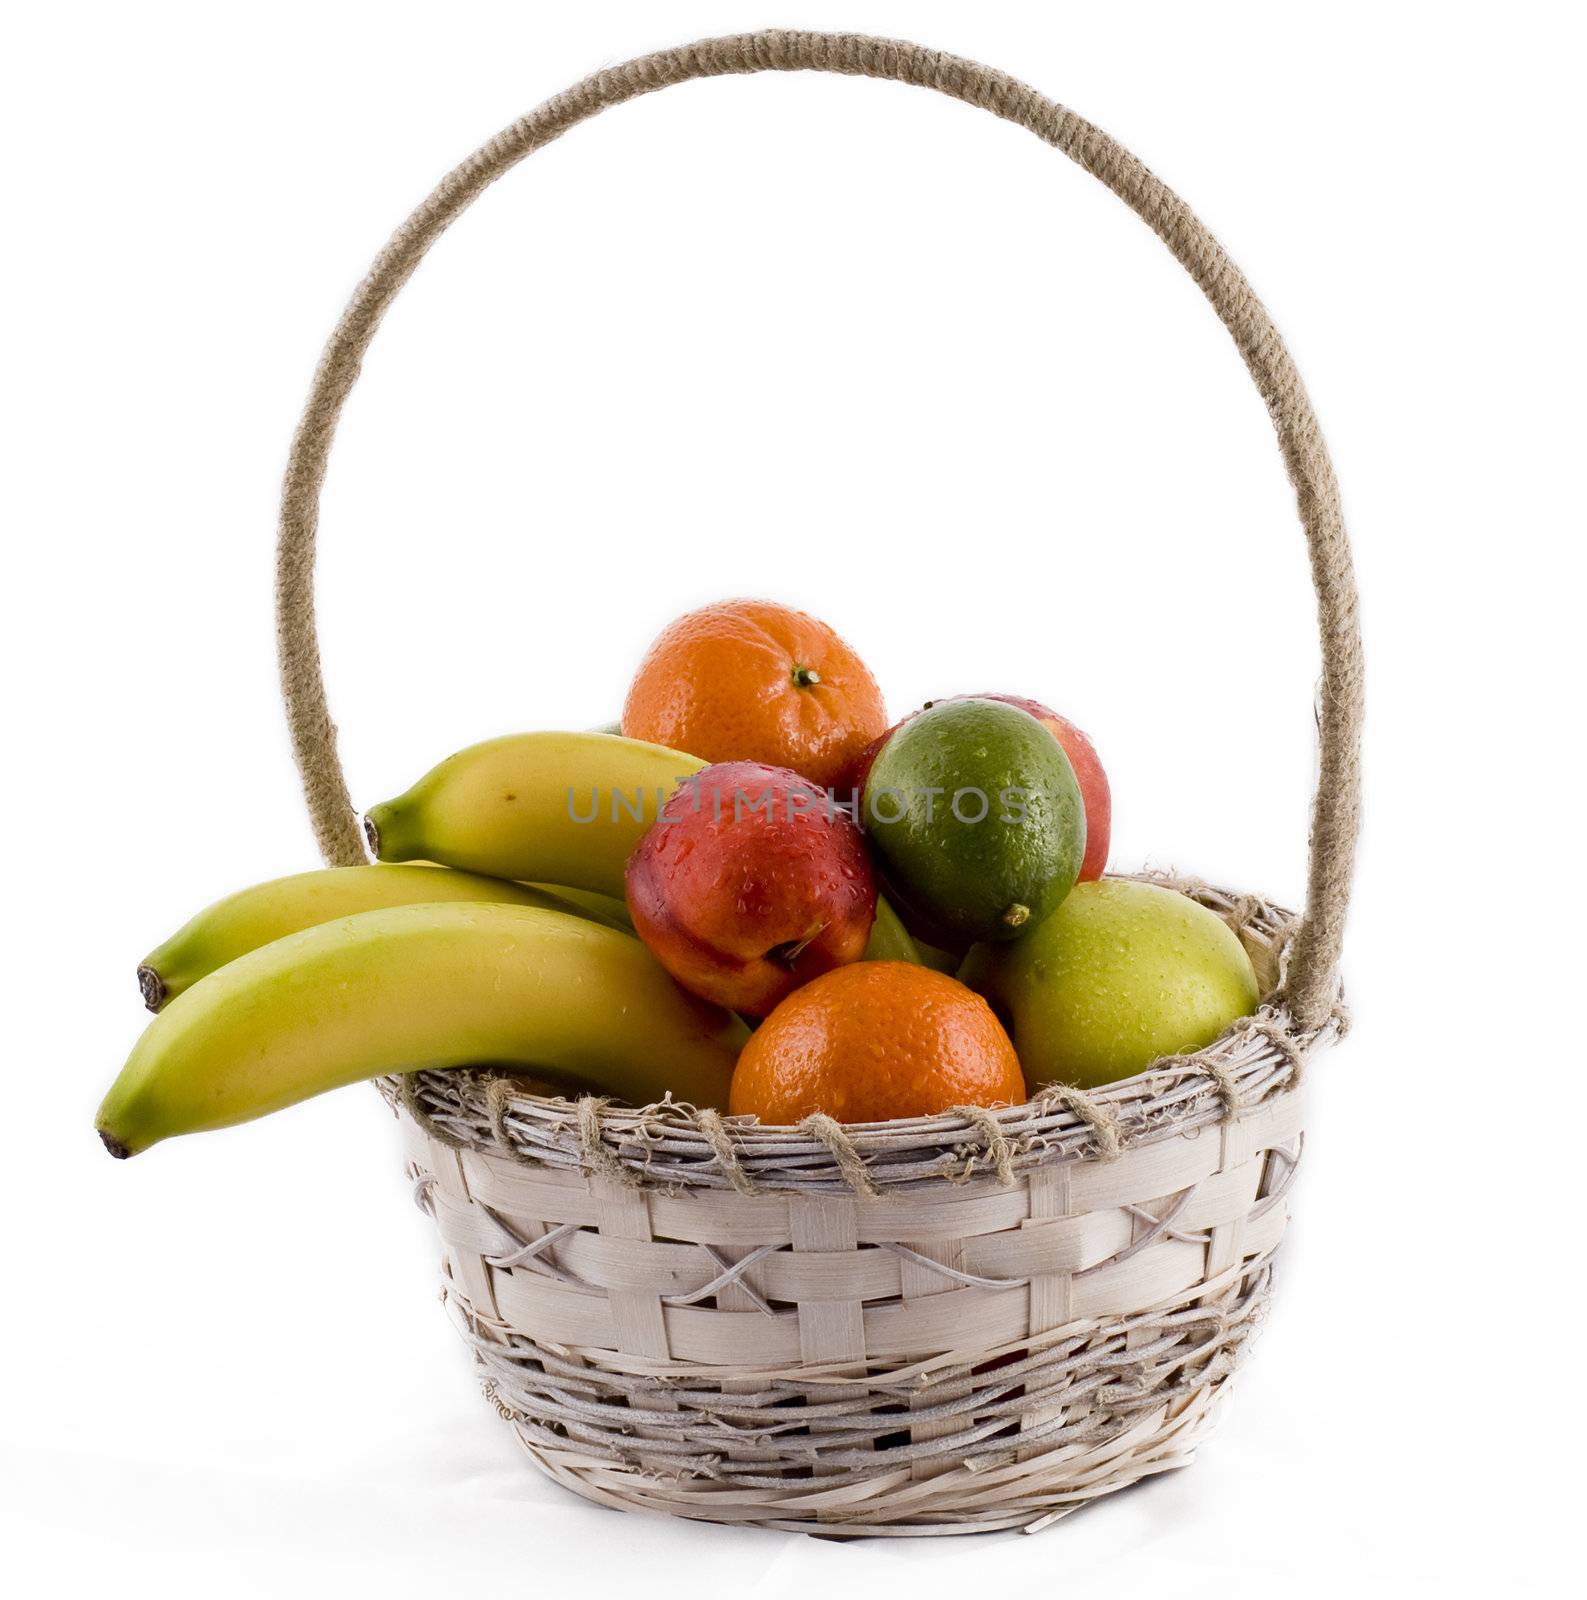 Fruits in retro basket on the white background - isolated